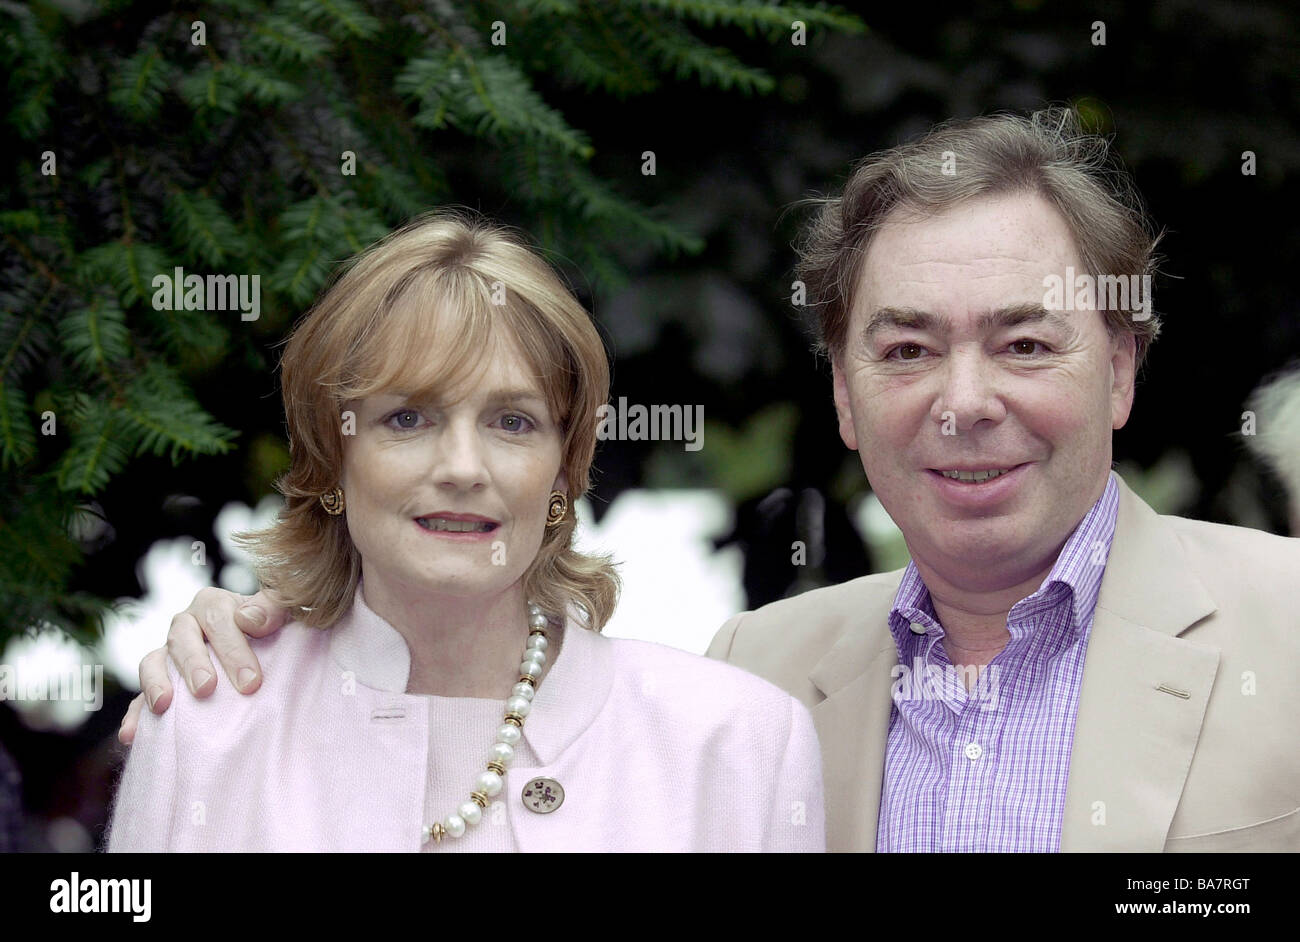 SIR ANDREW LLOYD WEBBER WITH HIS WIFE MADELEINE LLOYD WEBBER AT CELEBRITY PARTY IN CHELSEA LONDON Stock Photo